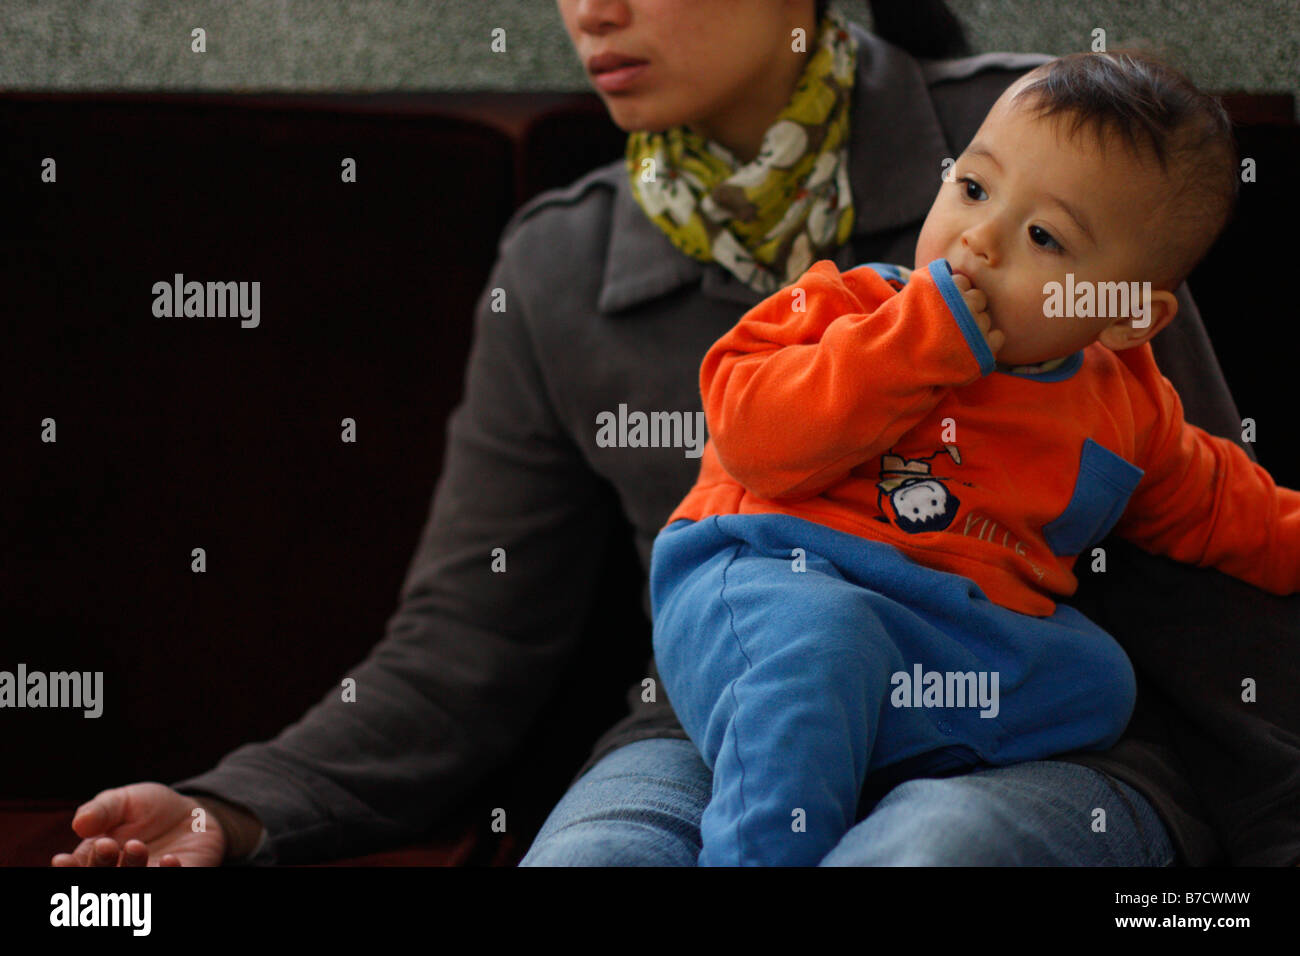 Toddler sitting on mother's lap and listening to the conversation. Stock Photo